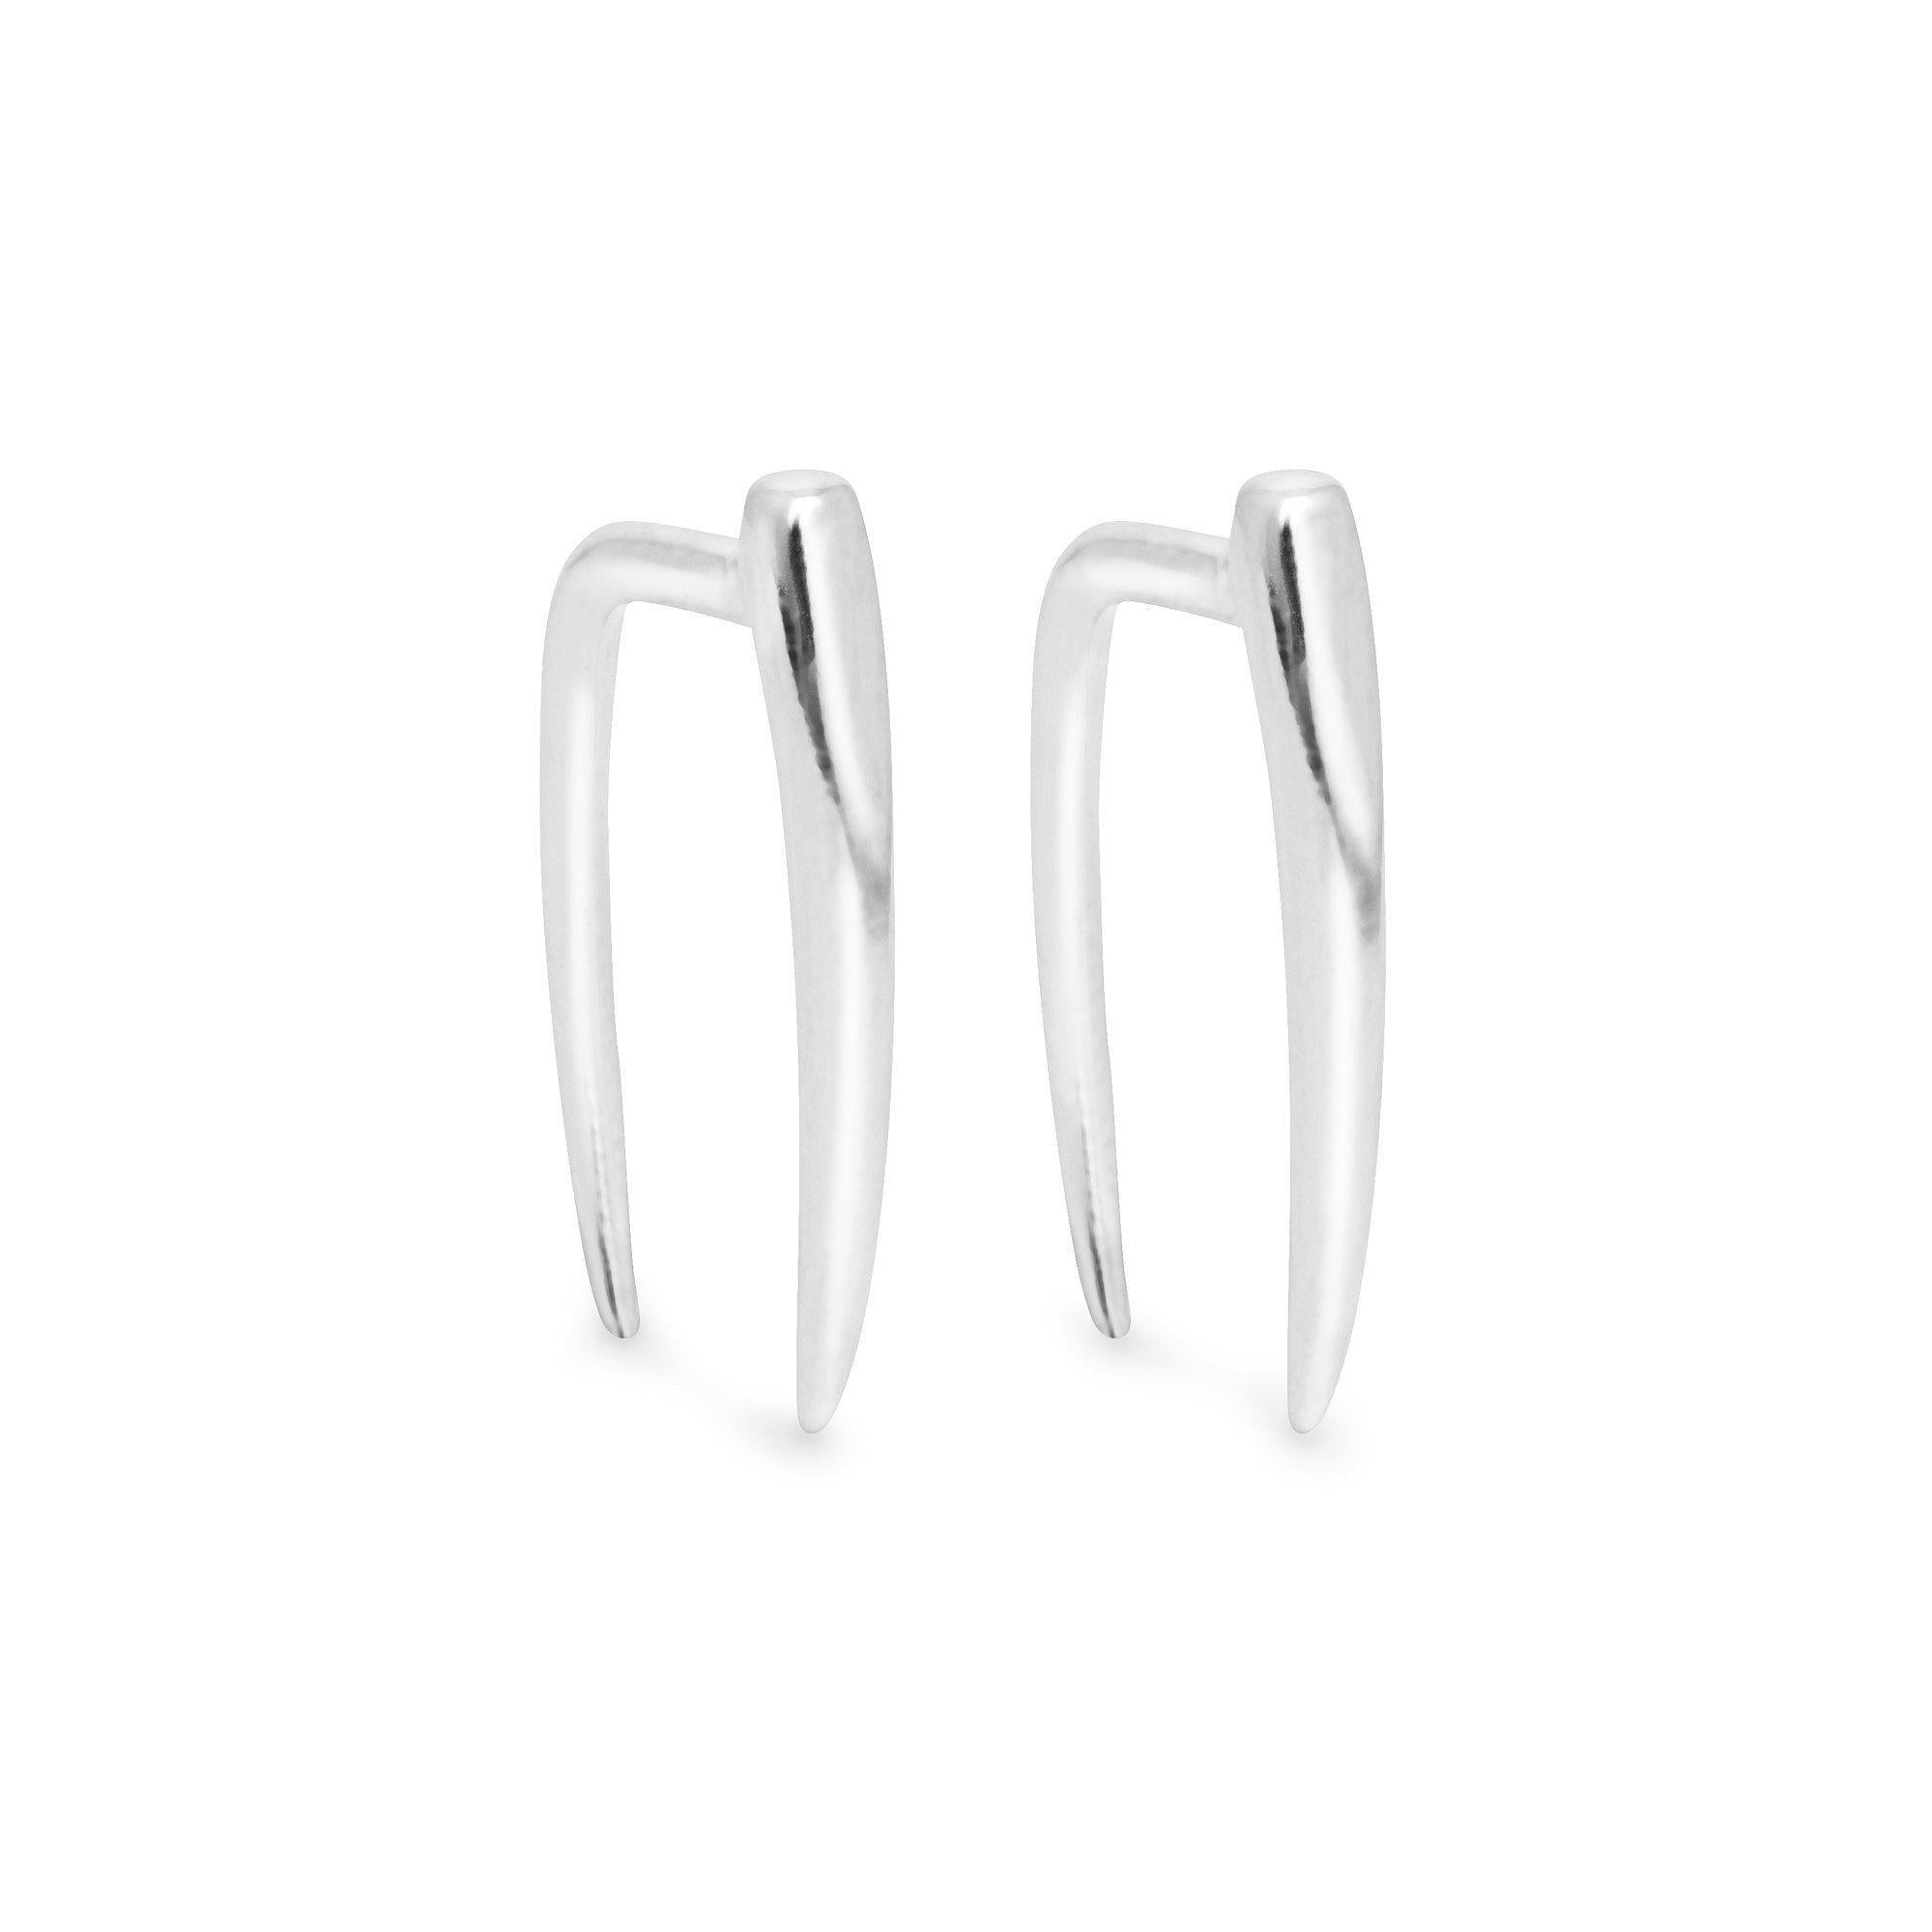 Zanna pair of white gold earrings - Helix & Conch